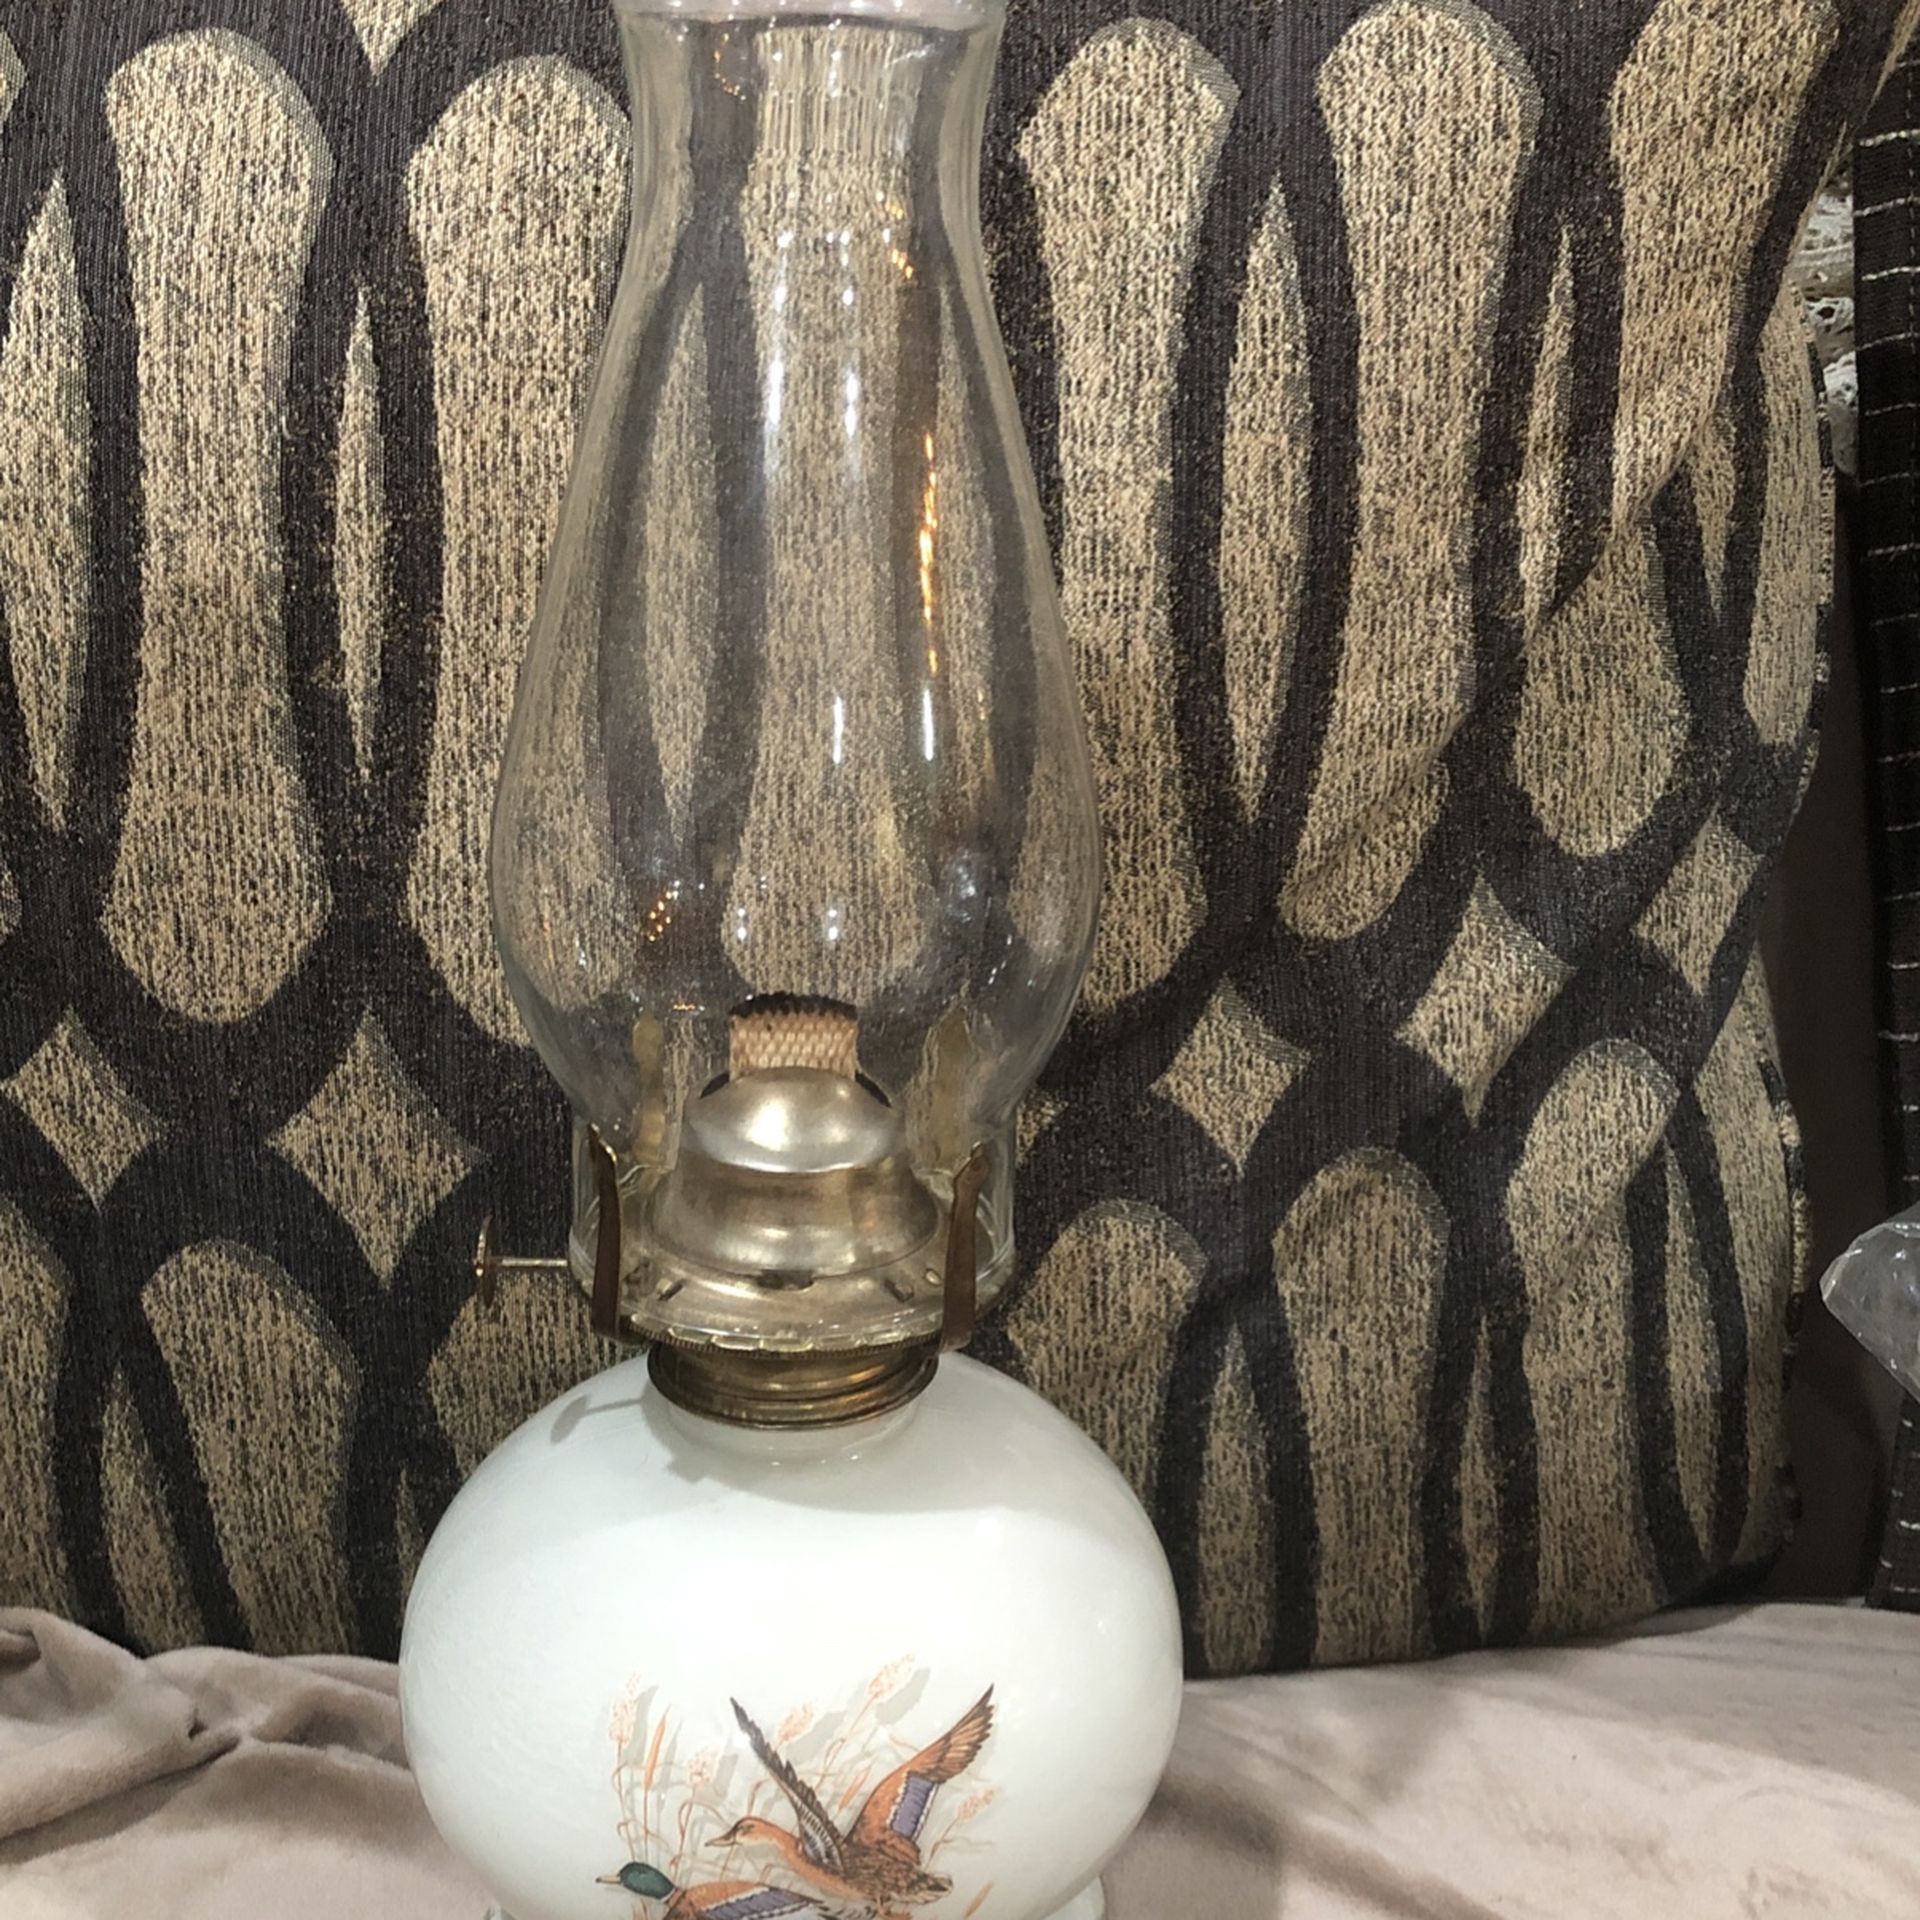 Vintage oil Lamp. Please see all the pictures